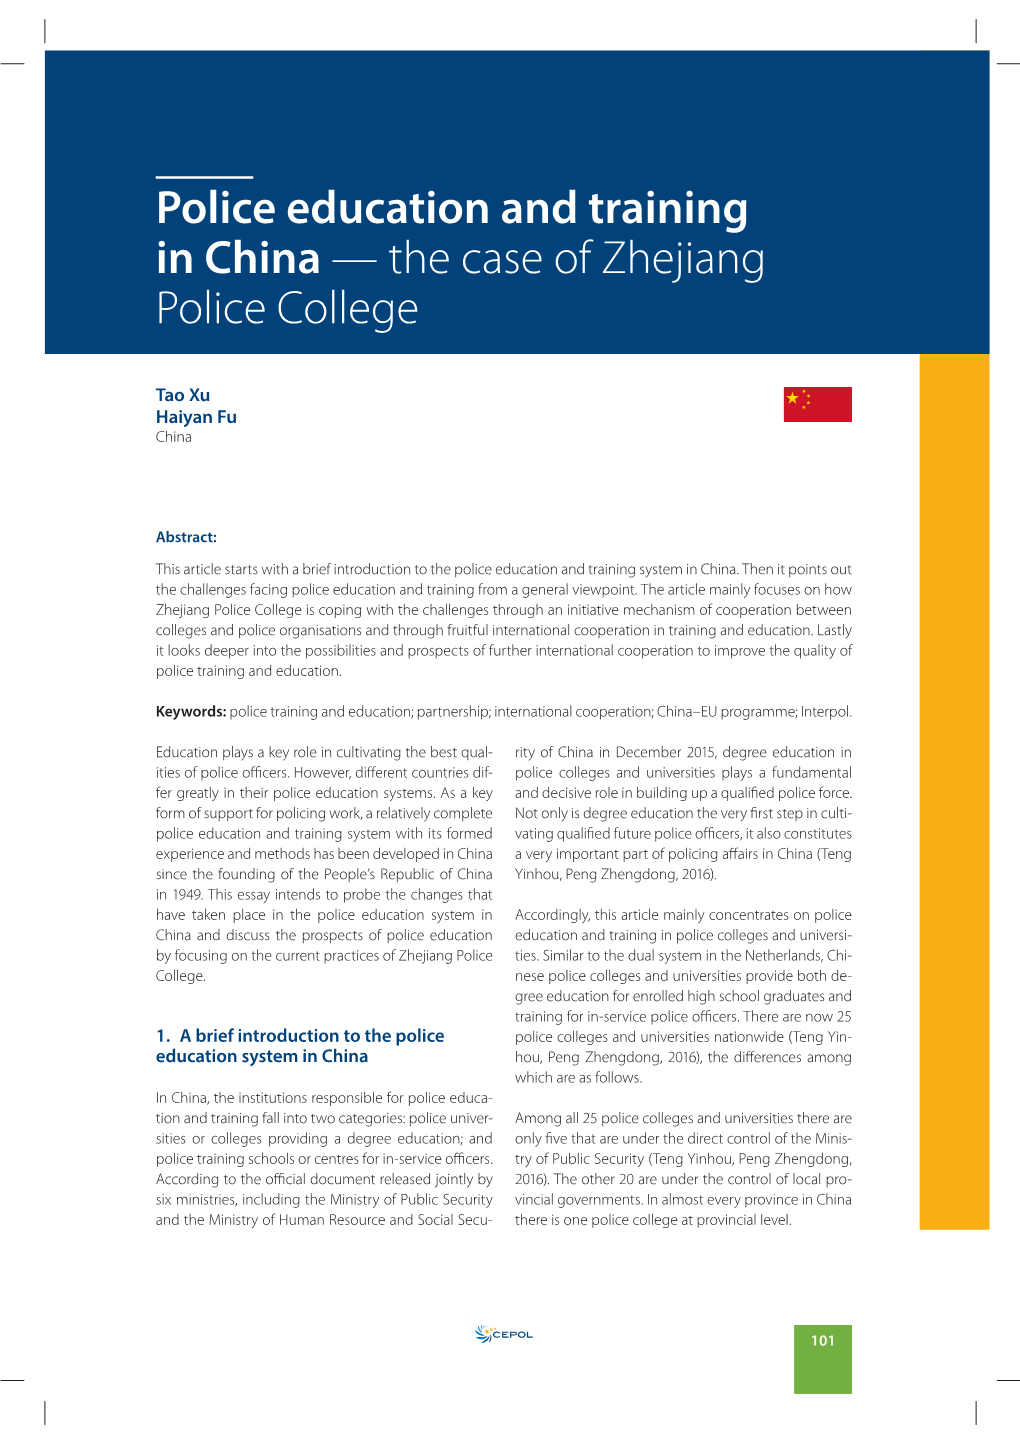 Police Education and Training in China — the Case of Zhejiang Police College Police Education and Training in China — the Case of Zhejiang Police College